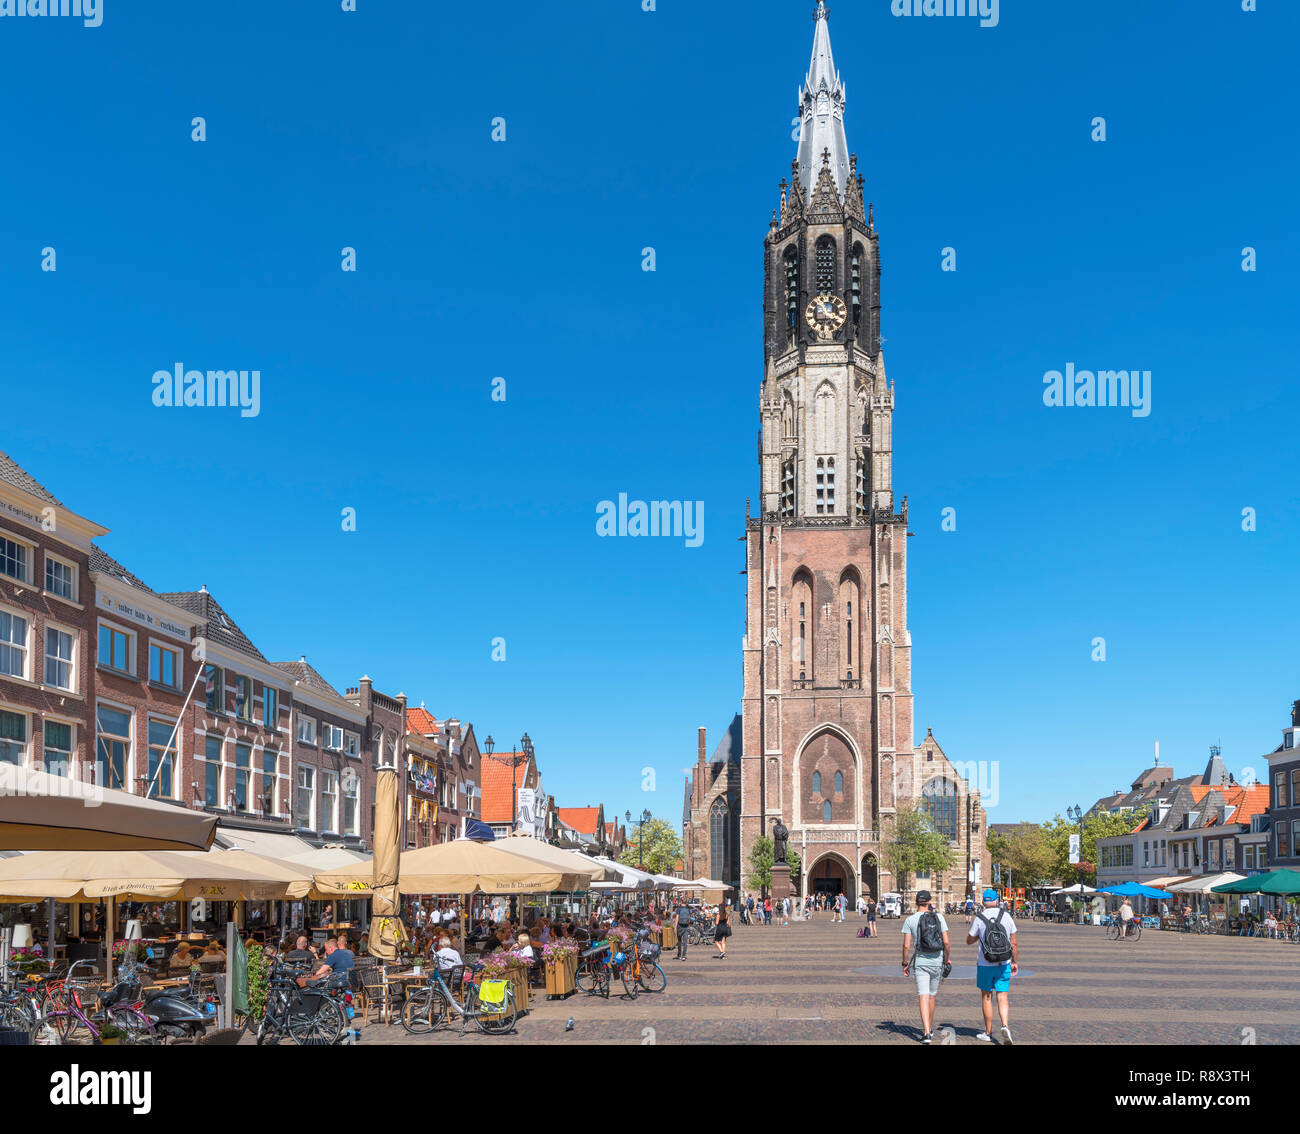 The historic 15th century Nieuwe Kerk (New Church) in the Markt (Market Square), Delft, Zuid-Holland (South Holland), Netherlands Stock Photo